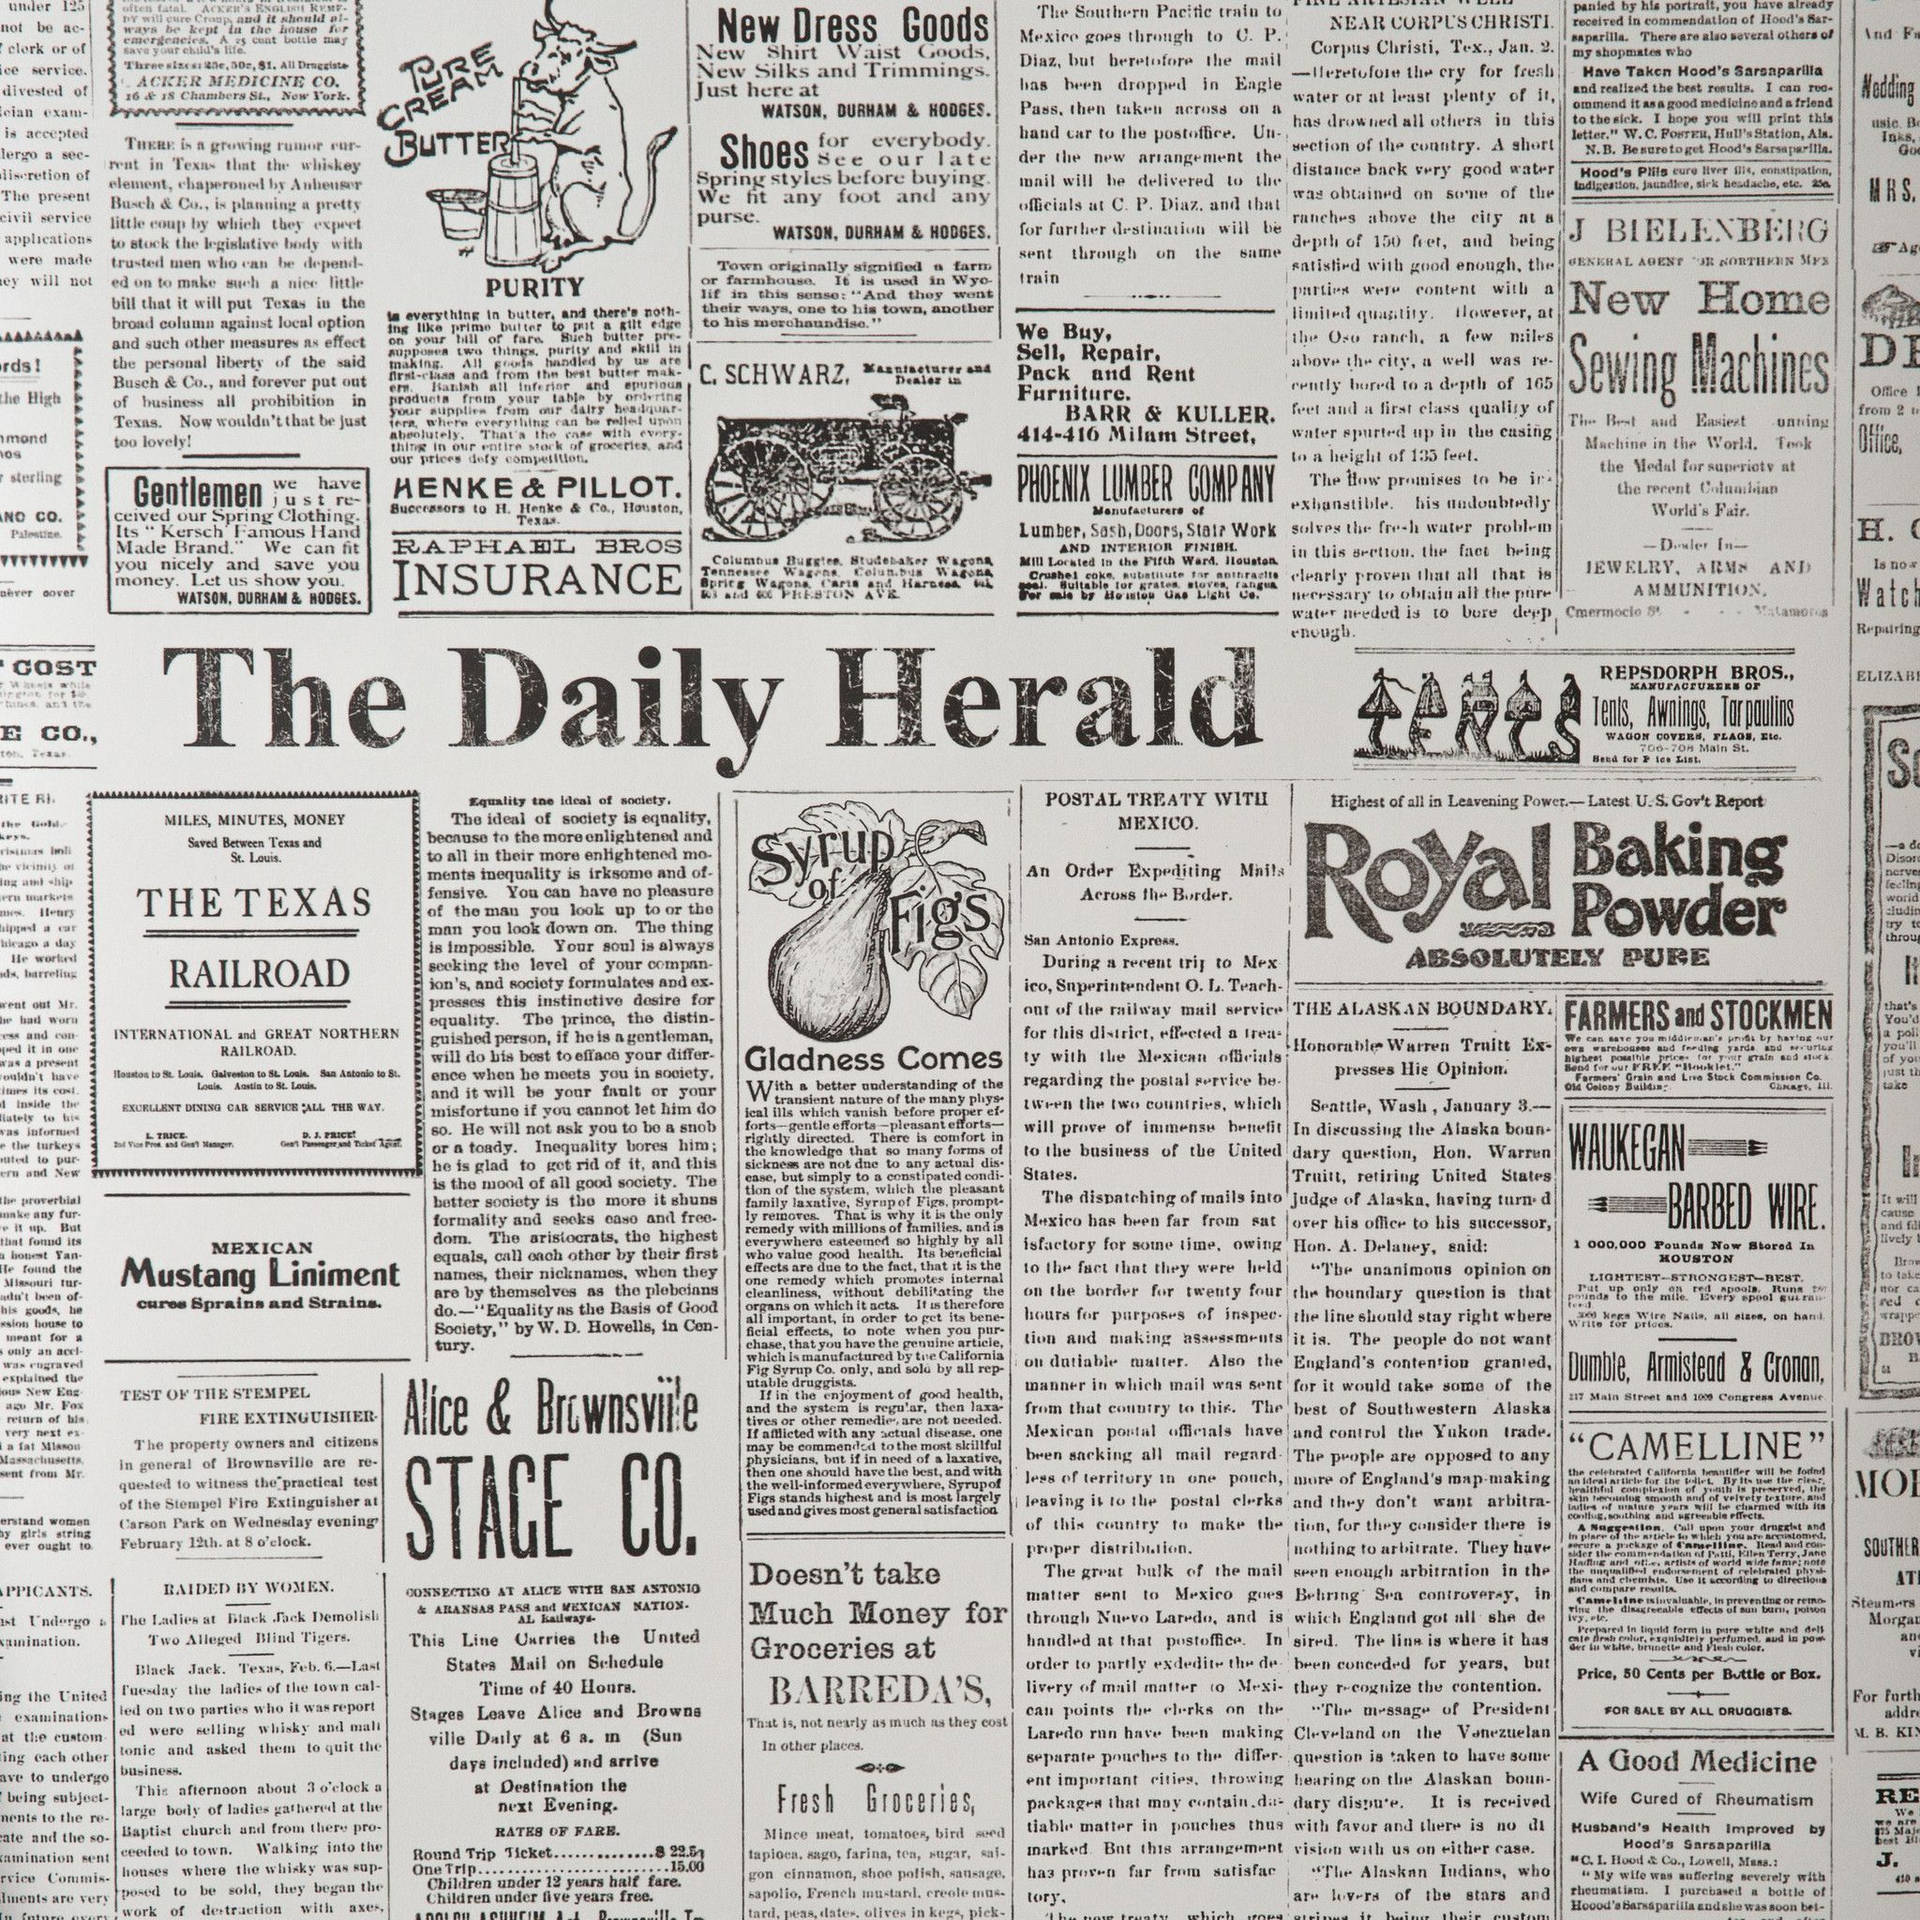 Newspaper Aesthetic The Daily Herald